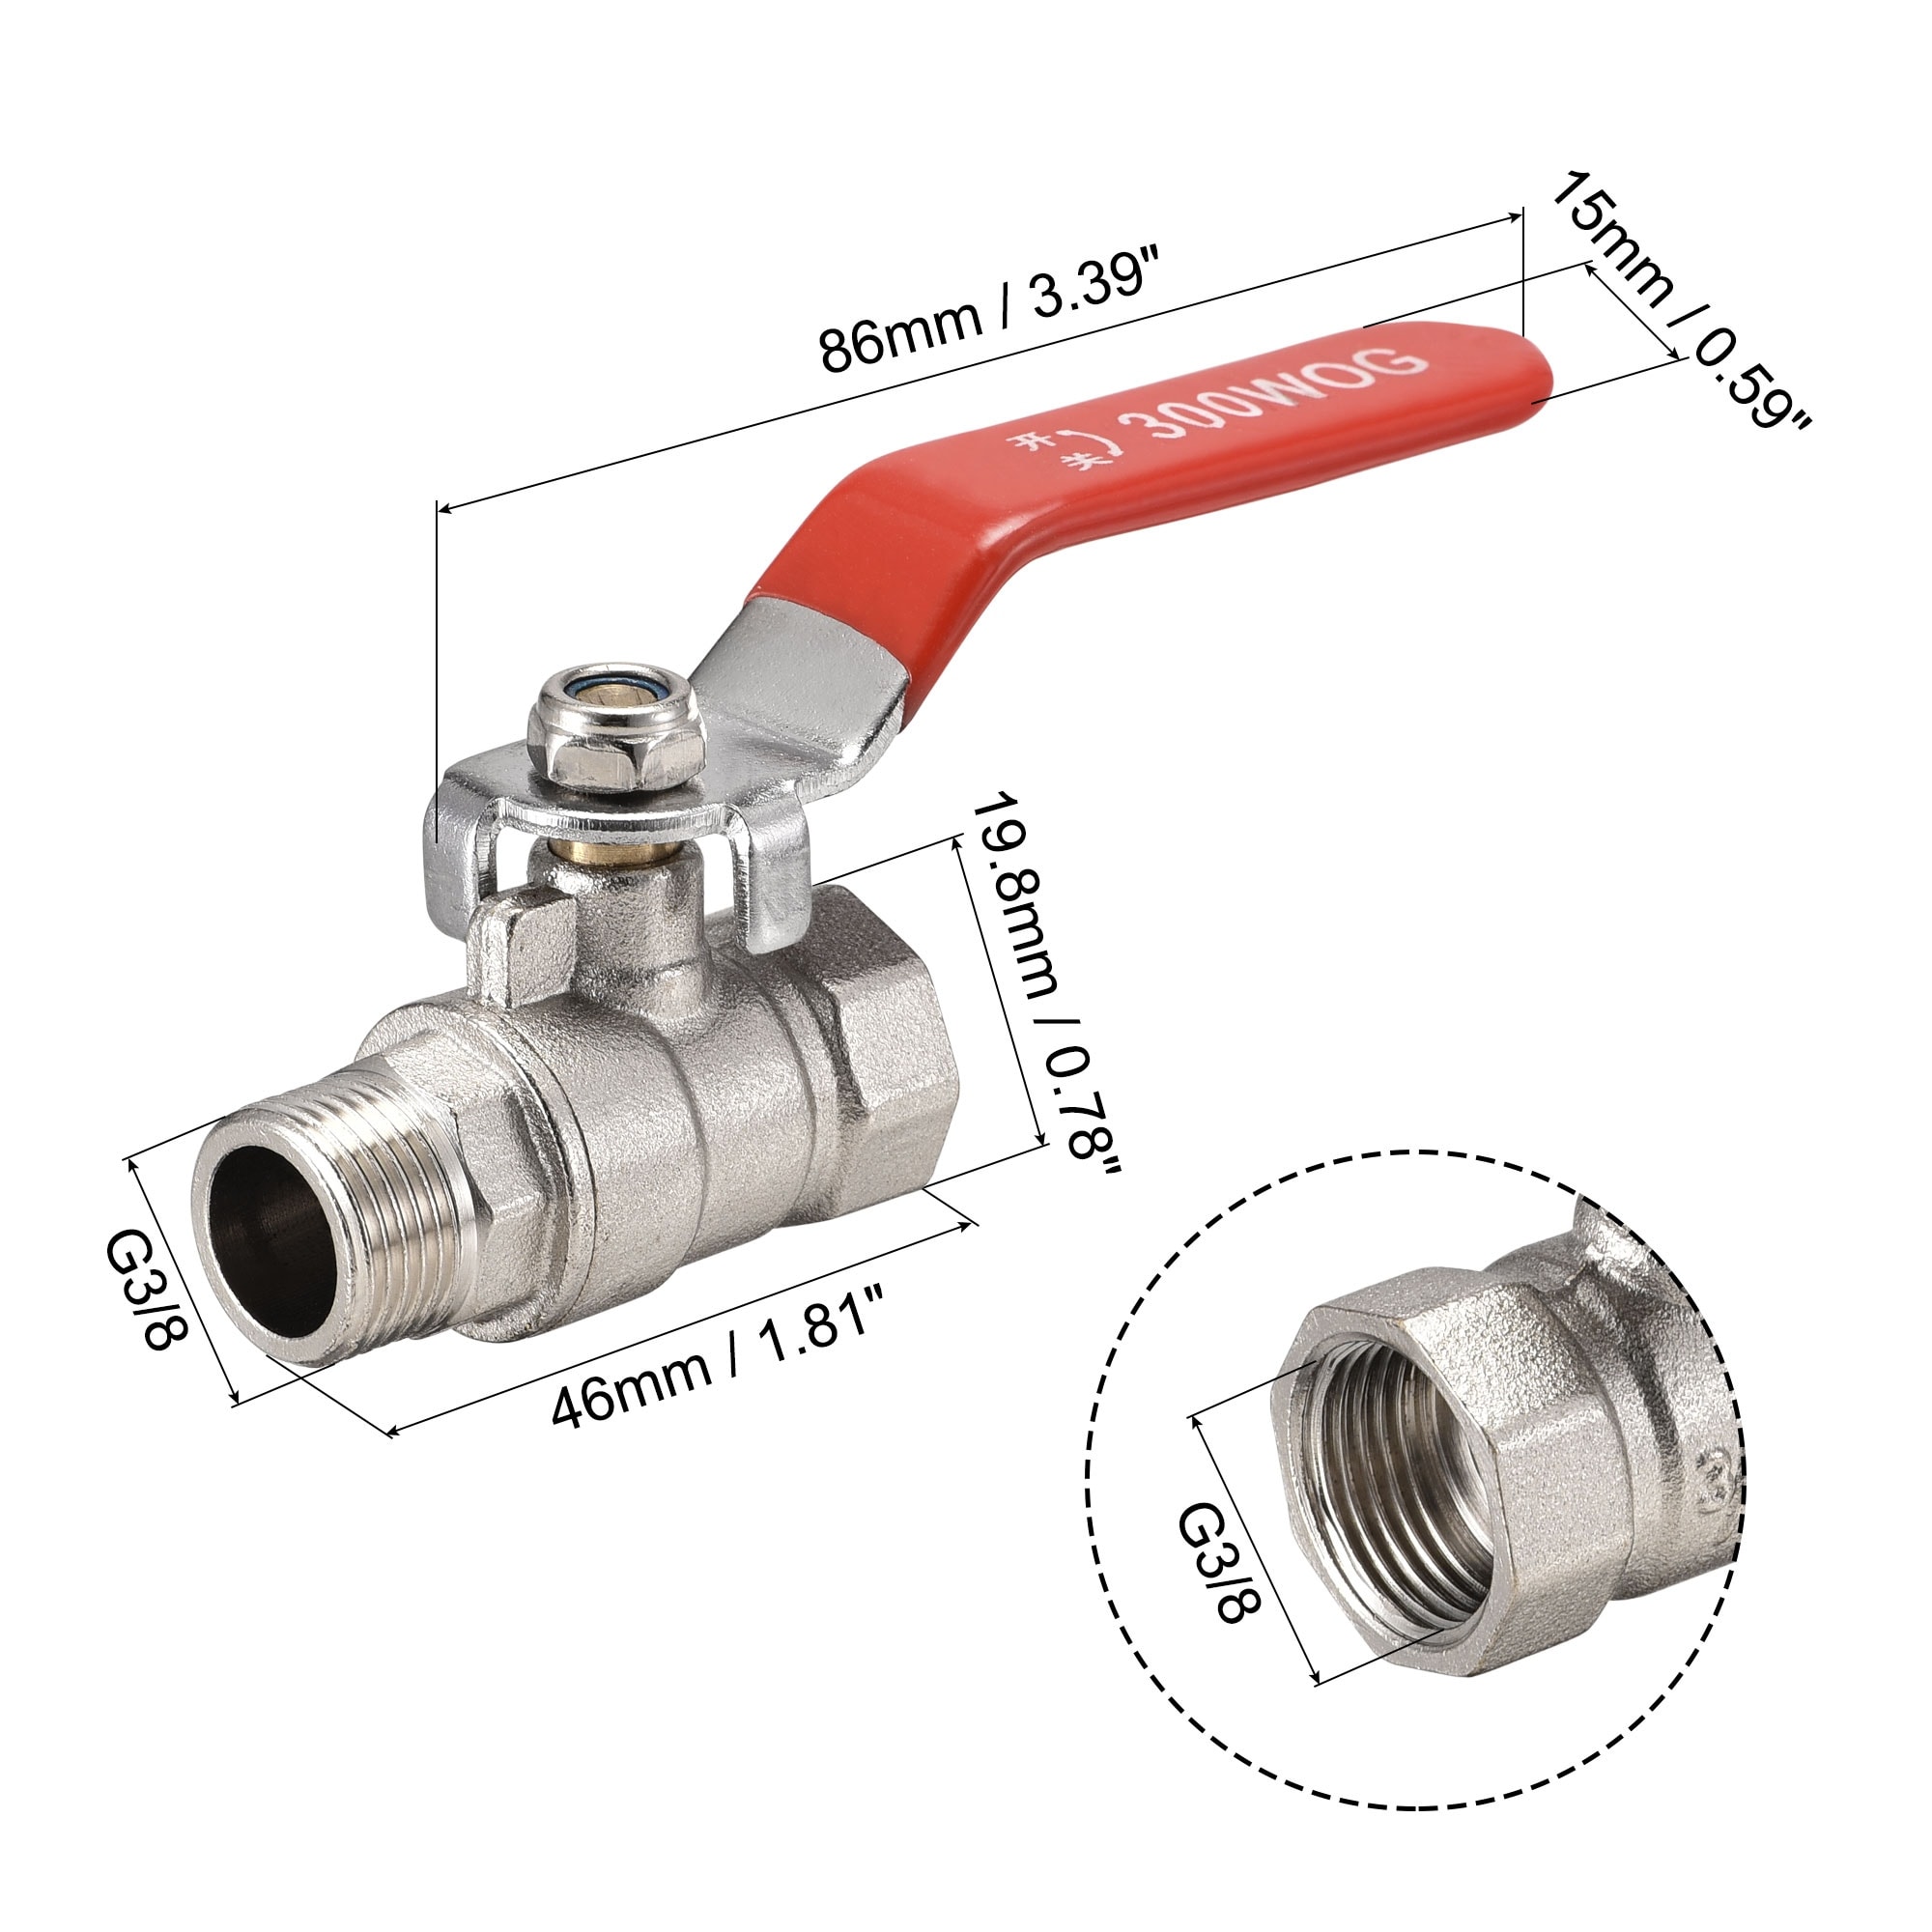 3/8" X 1/2" GAS ISOLATION LEVER VALVE WITH TEST POINT 3/8 MALE X 1/2 FEMALE 